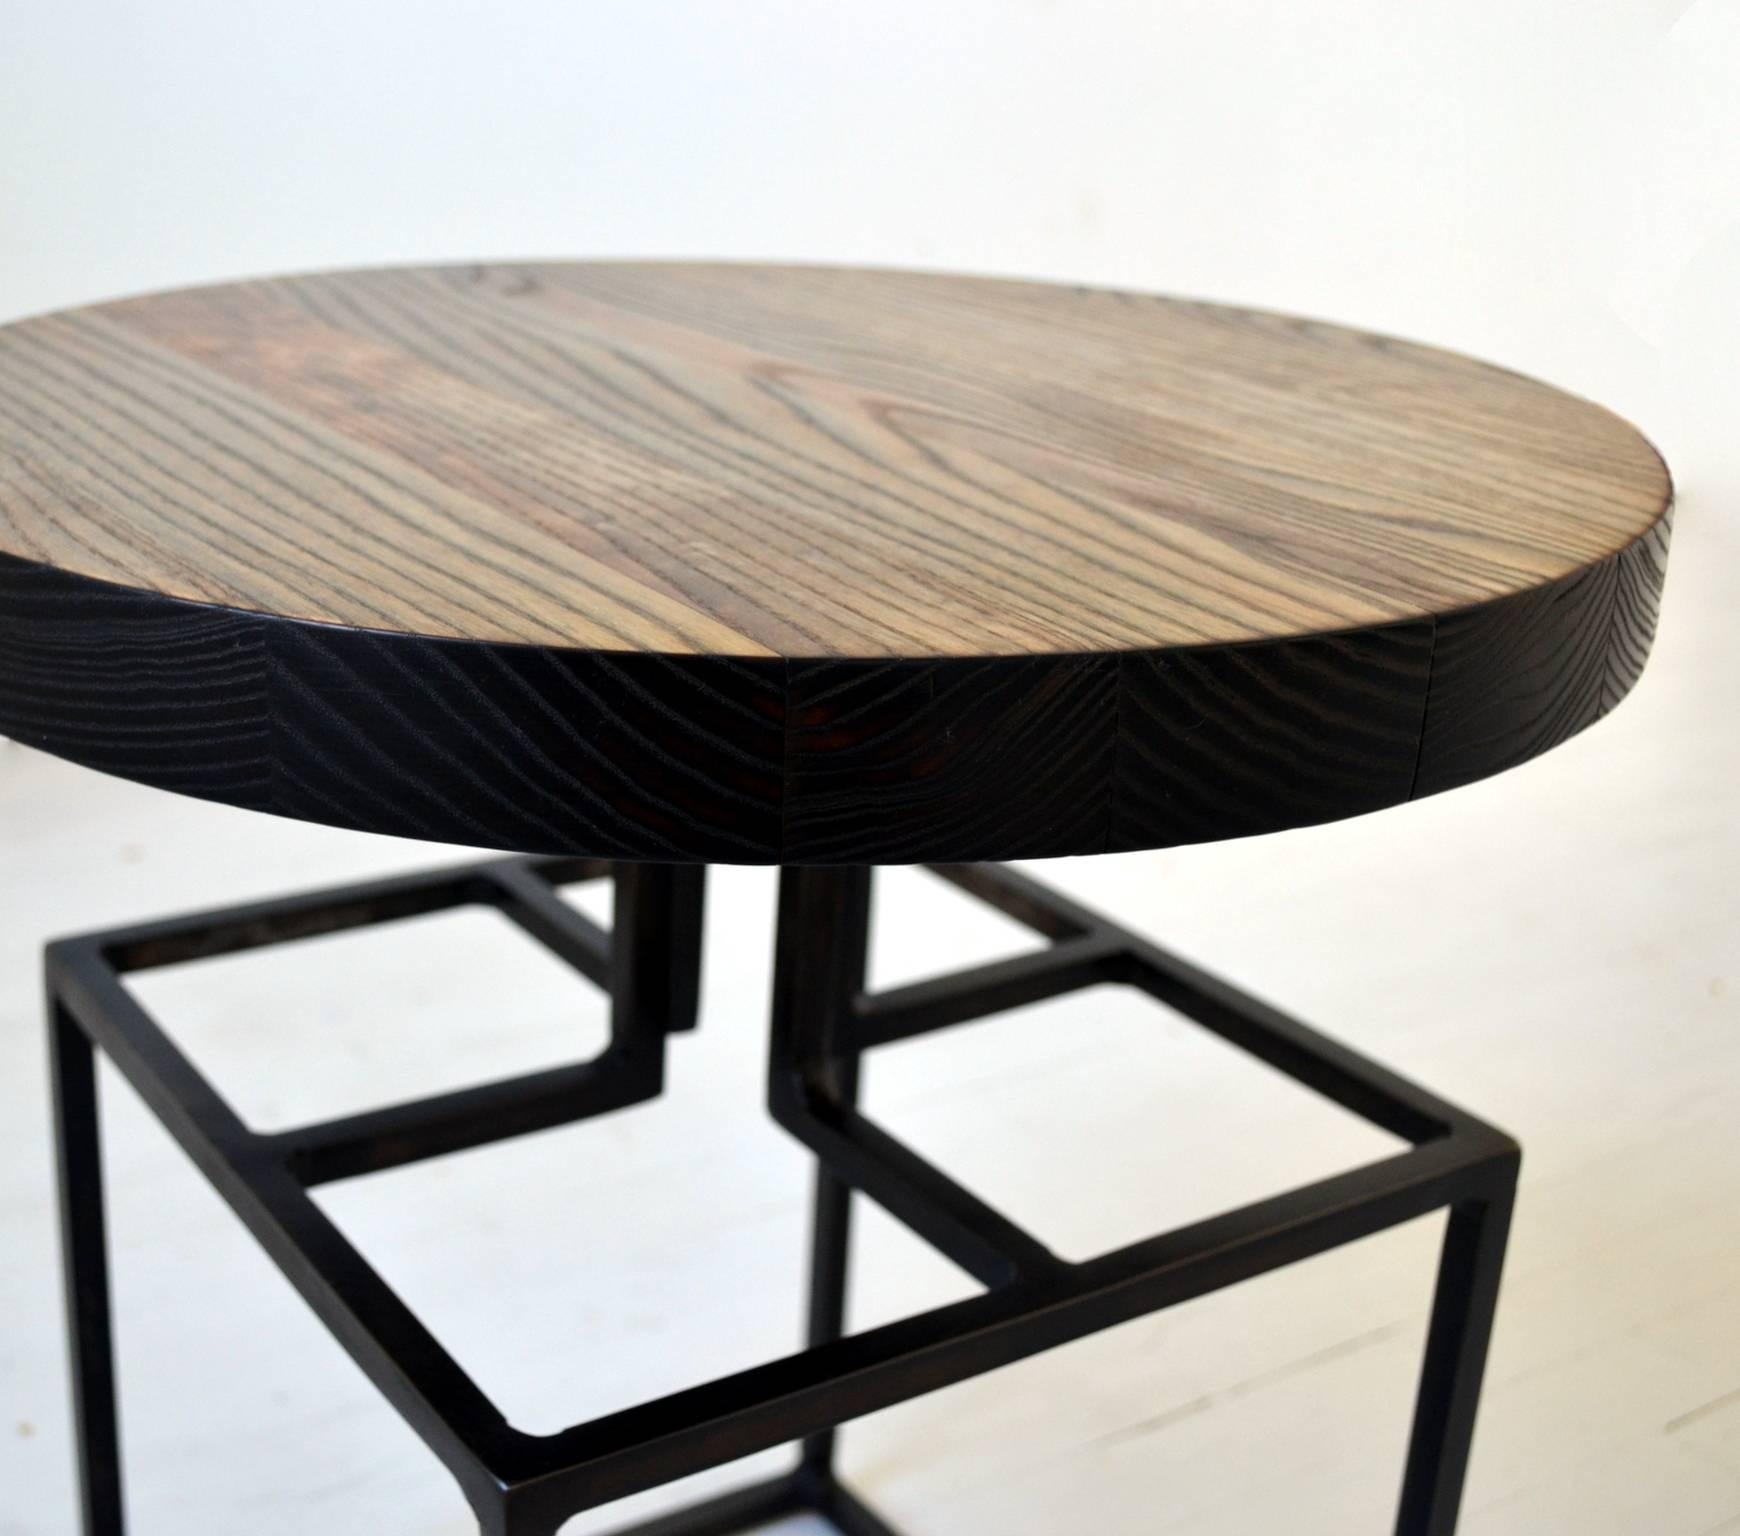 Taking a design cue from our Archetype chair, The Willard table is created with a steel base and paired with a round wooden top with a charred edge. Finished in our Philadelphia studio by a select team of craftspeople, their skill and careful